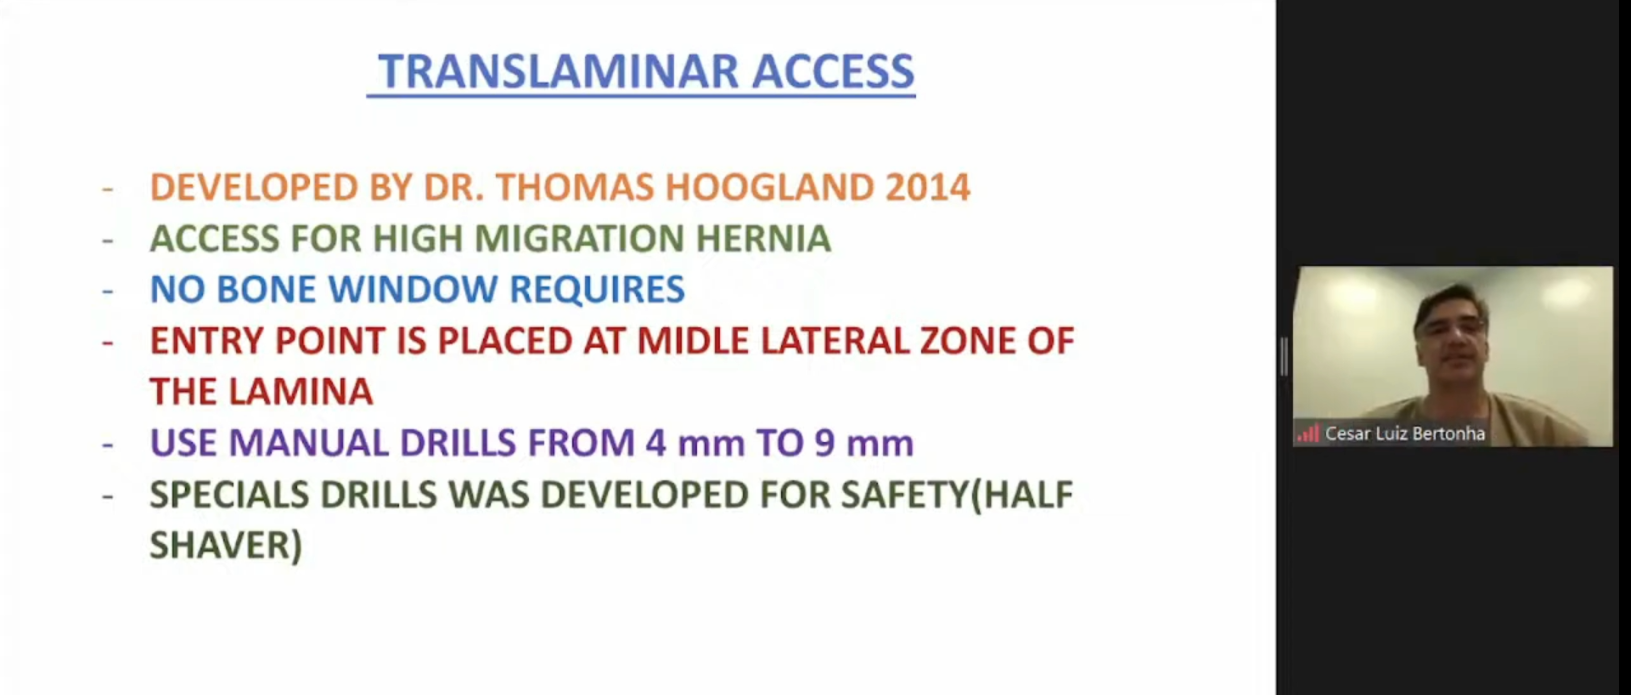 Trnslaminar Access Dr Cesar Luiz Bertonha Developed by Dr. Thomas Hoogland 2014 Access for high Migration requires Entry Point is placed at Midle Lateral Zone of the Lamina Use Manual Drills from 4mm to 9 mm Special Drills was Developed for safety (Half Shaver)